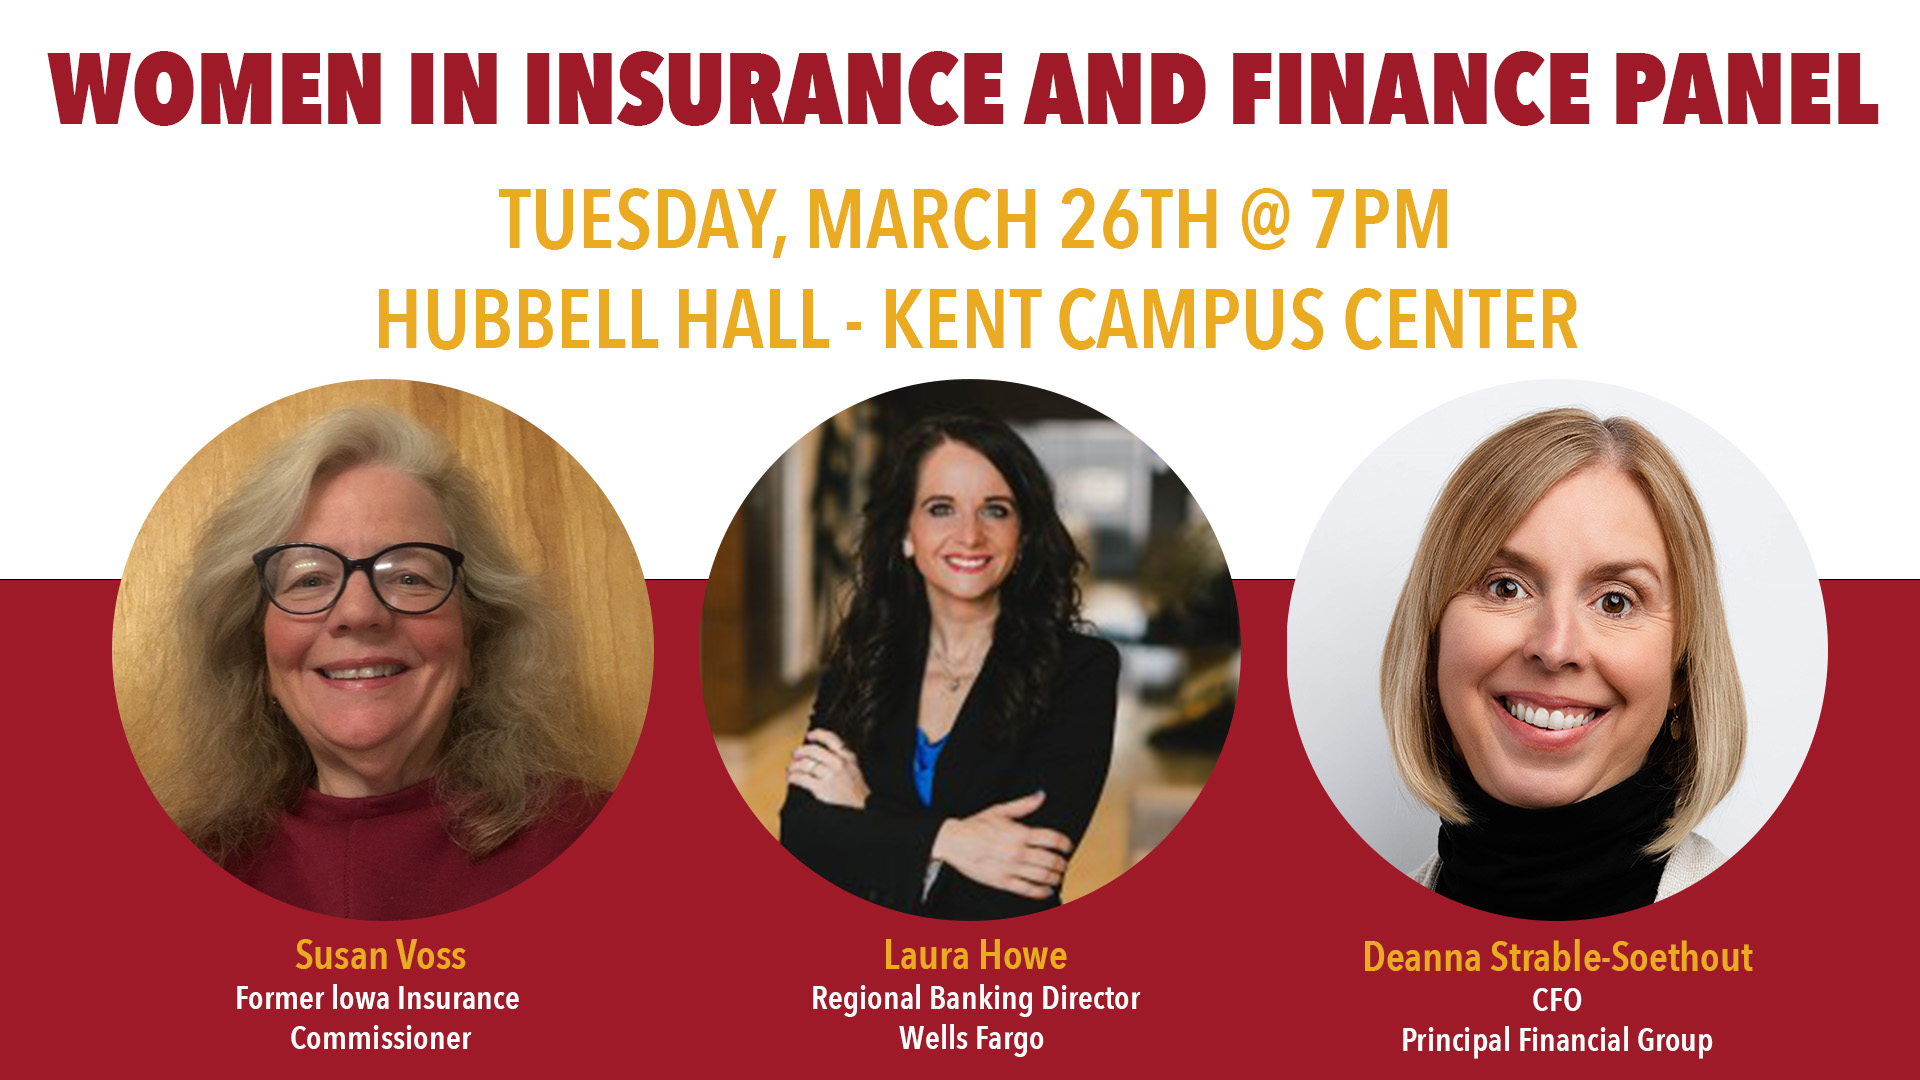 Simpson College to Host Women in Insurance and Finance Panel